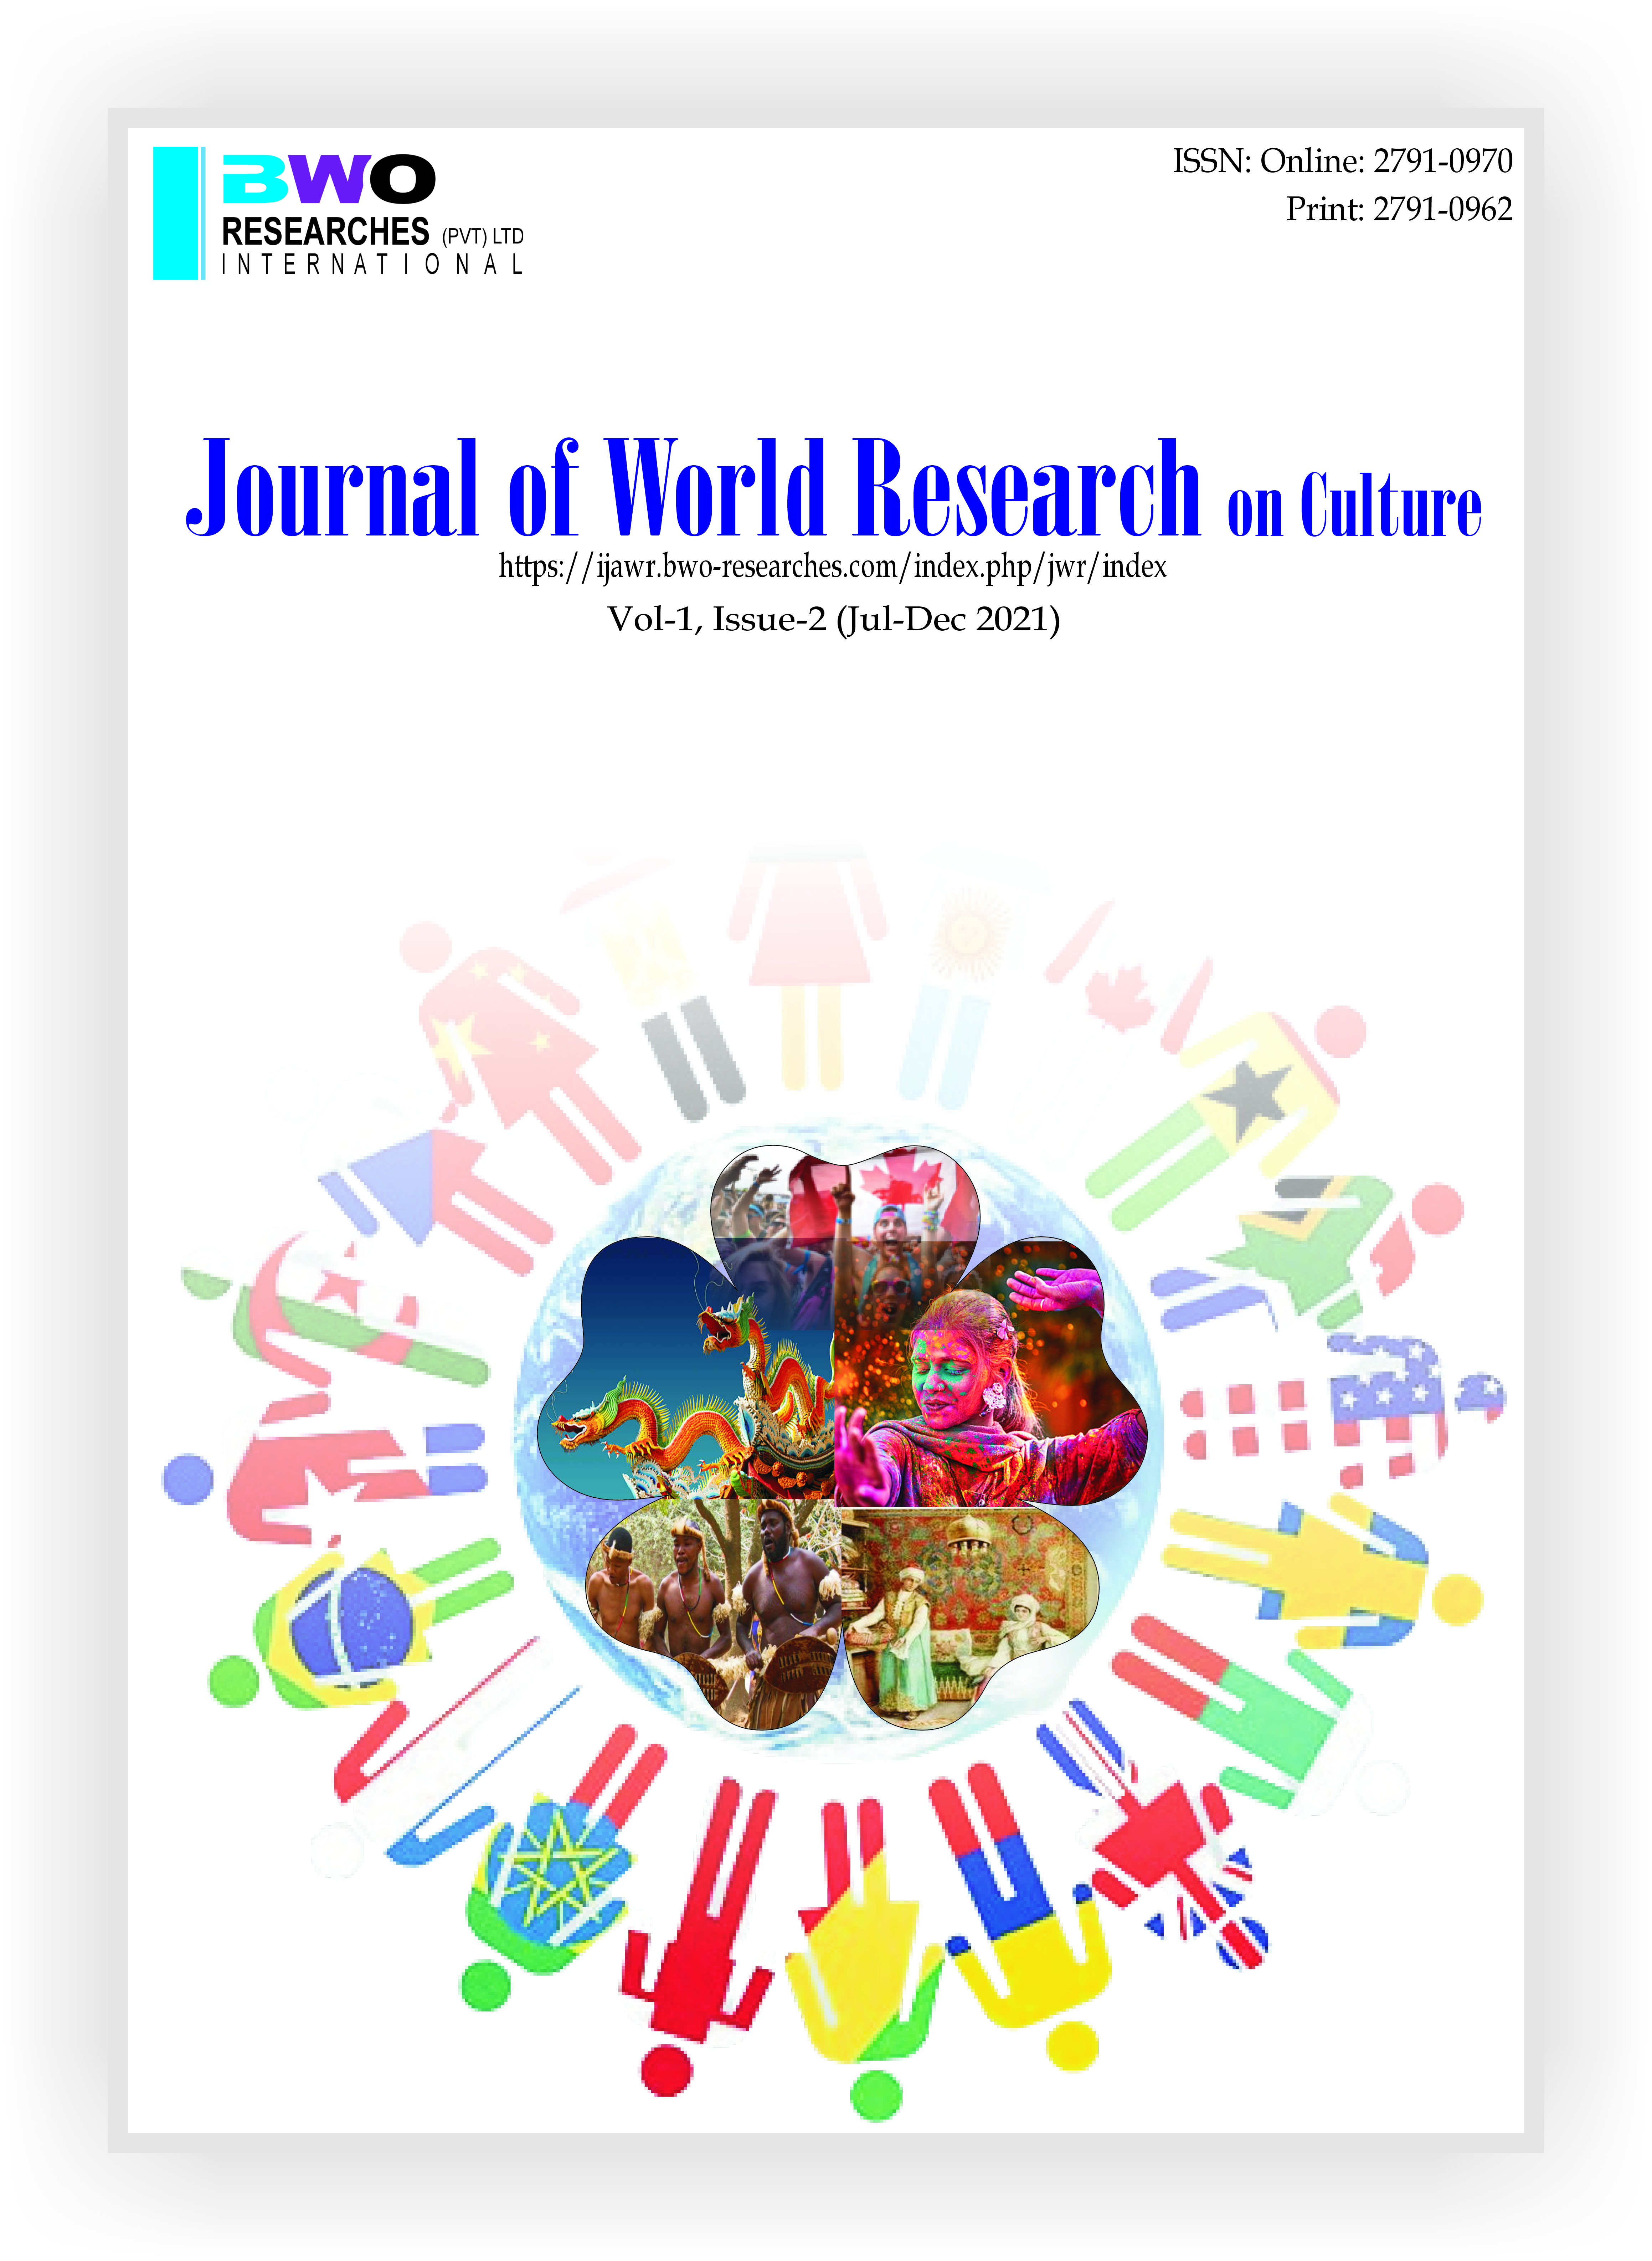 					Toon Vol 1 Nr 1 (2021): The Journal of World Research on Culture
				